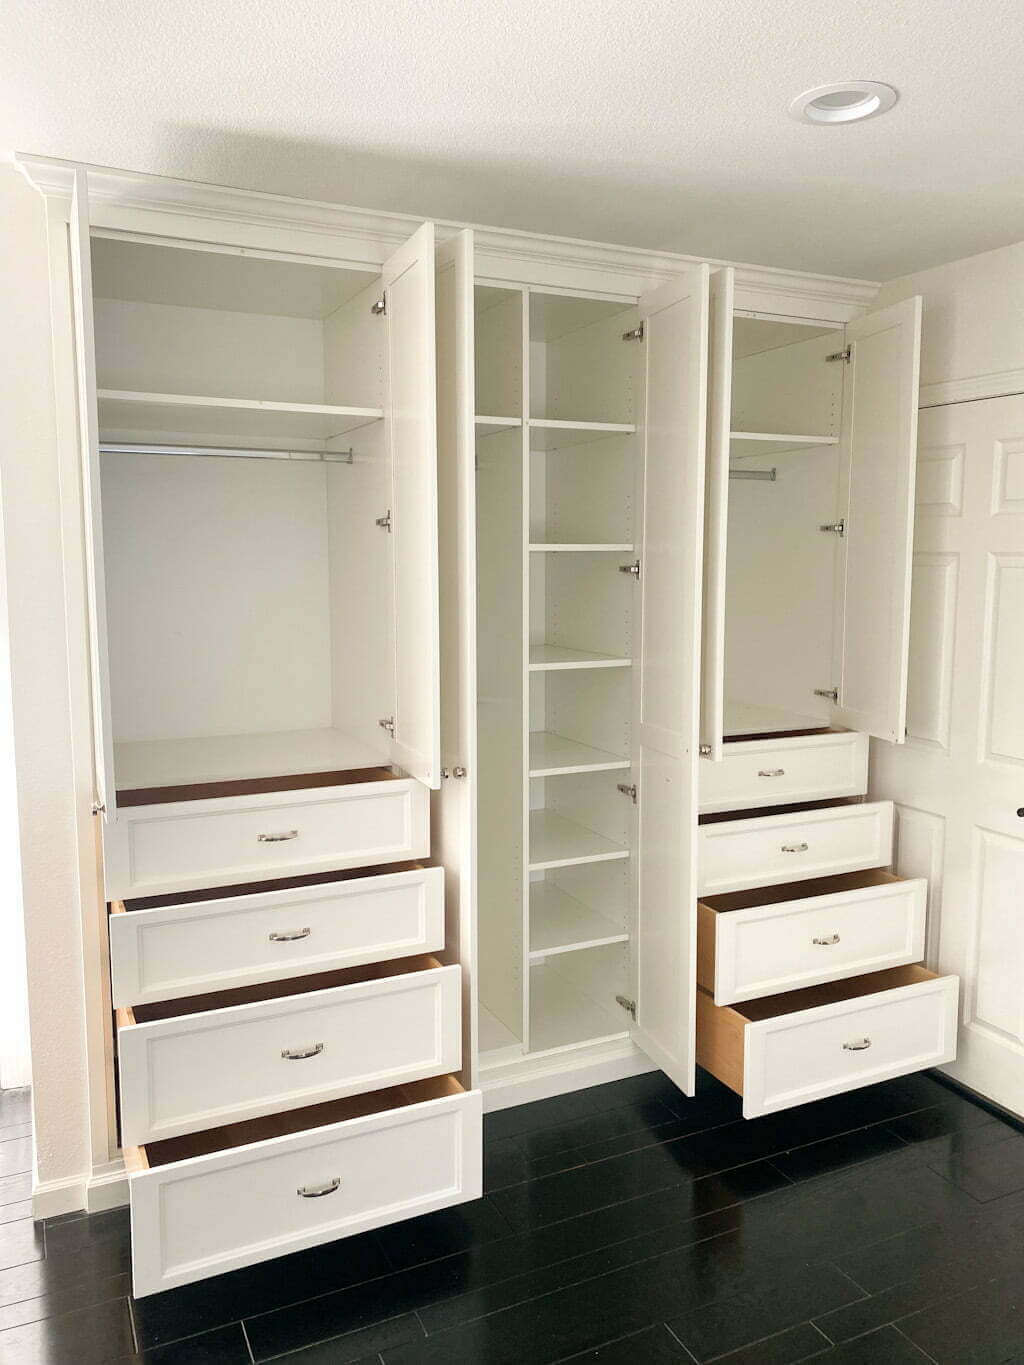 bedroom closet built ins, converted from standard closet, white wood